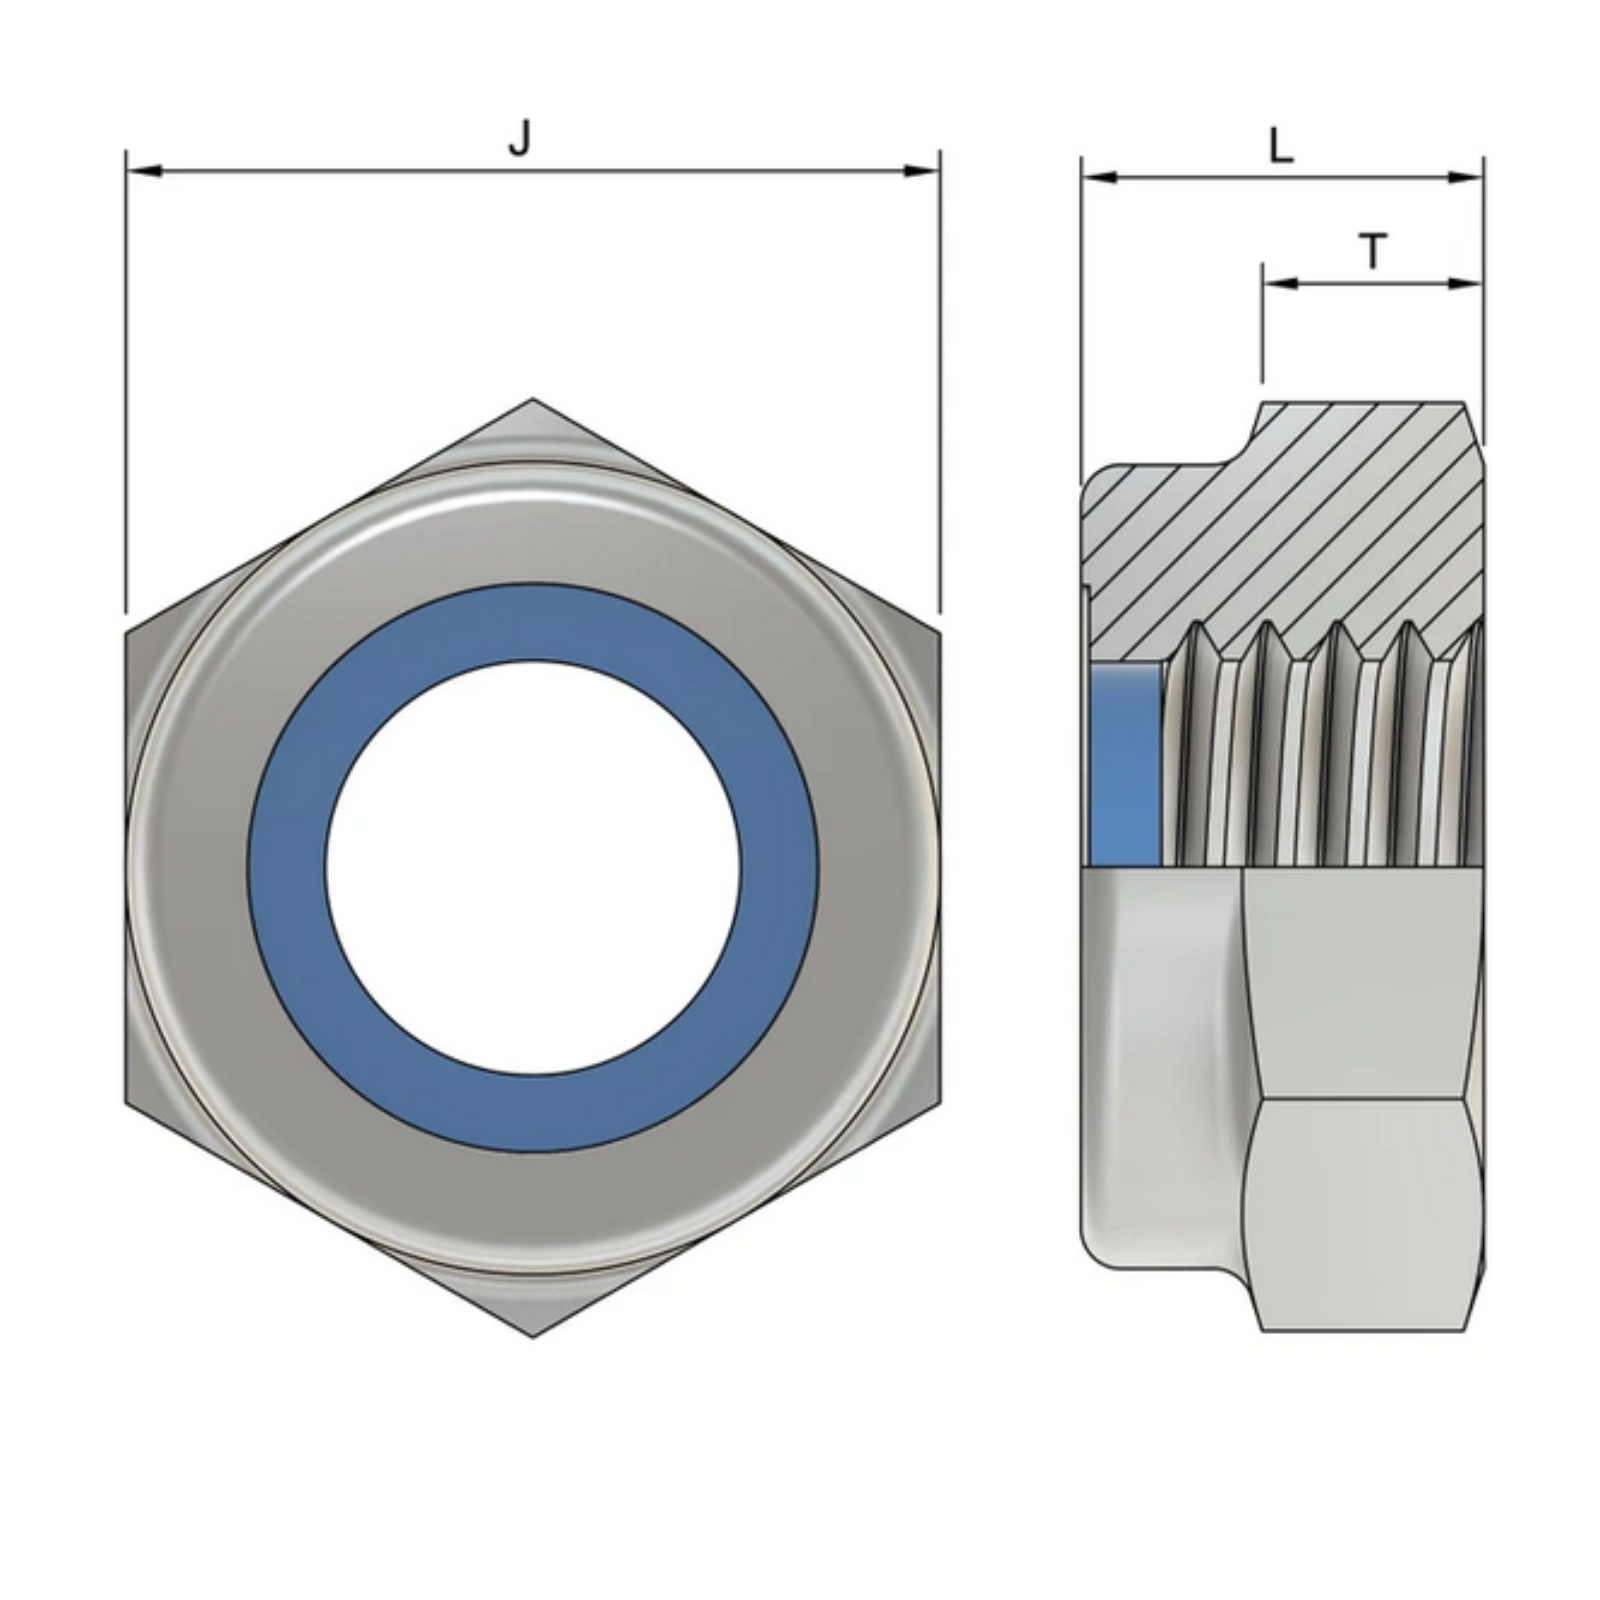 M4 Hexagon Nylon Locking Nuts (DIN 985) - Stainless Steel (A4)